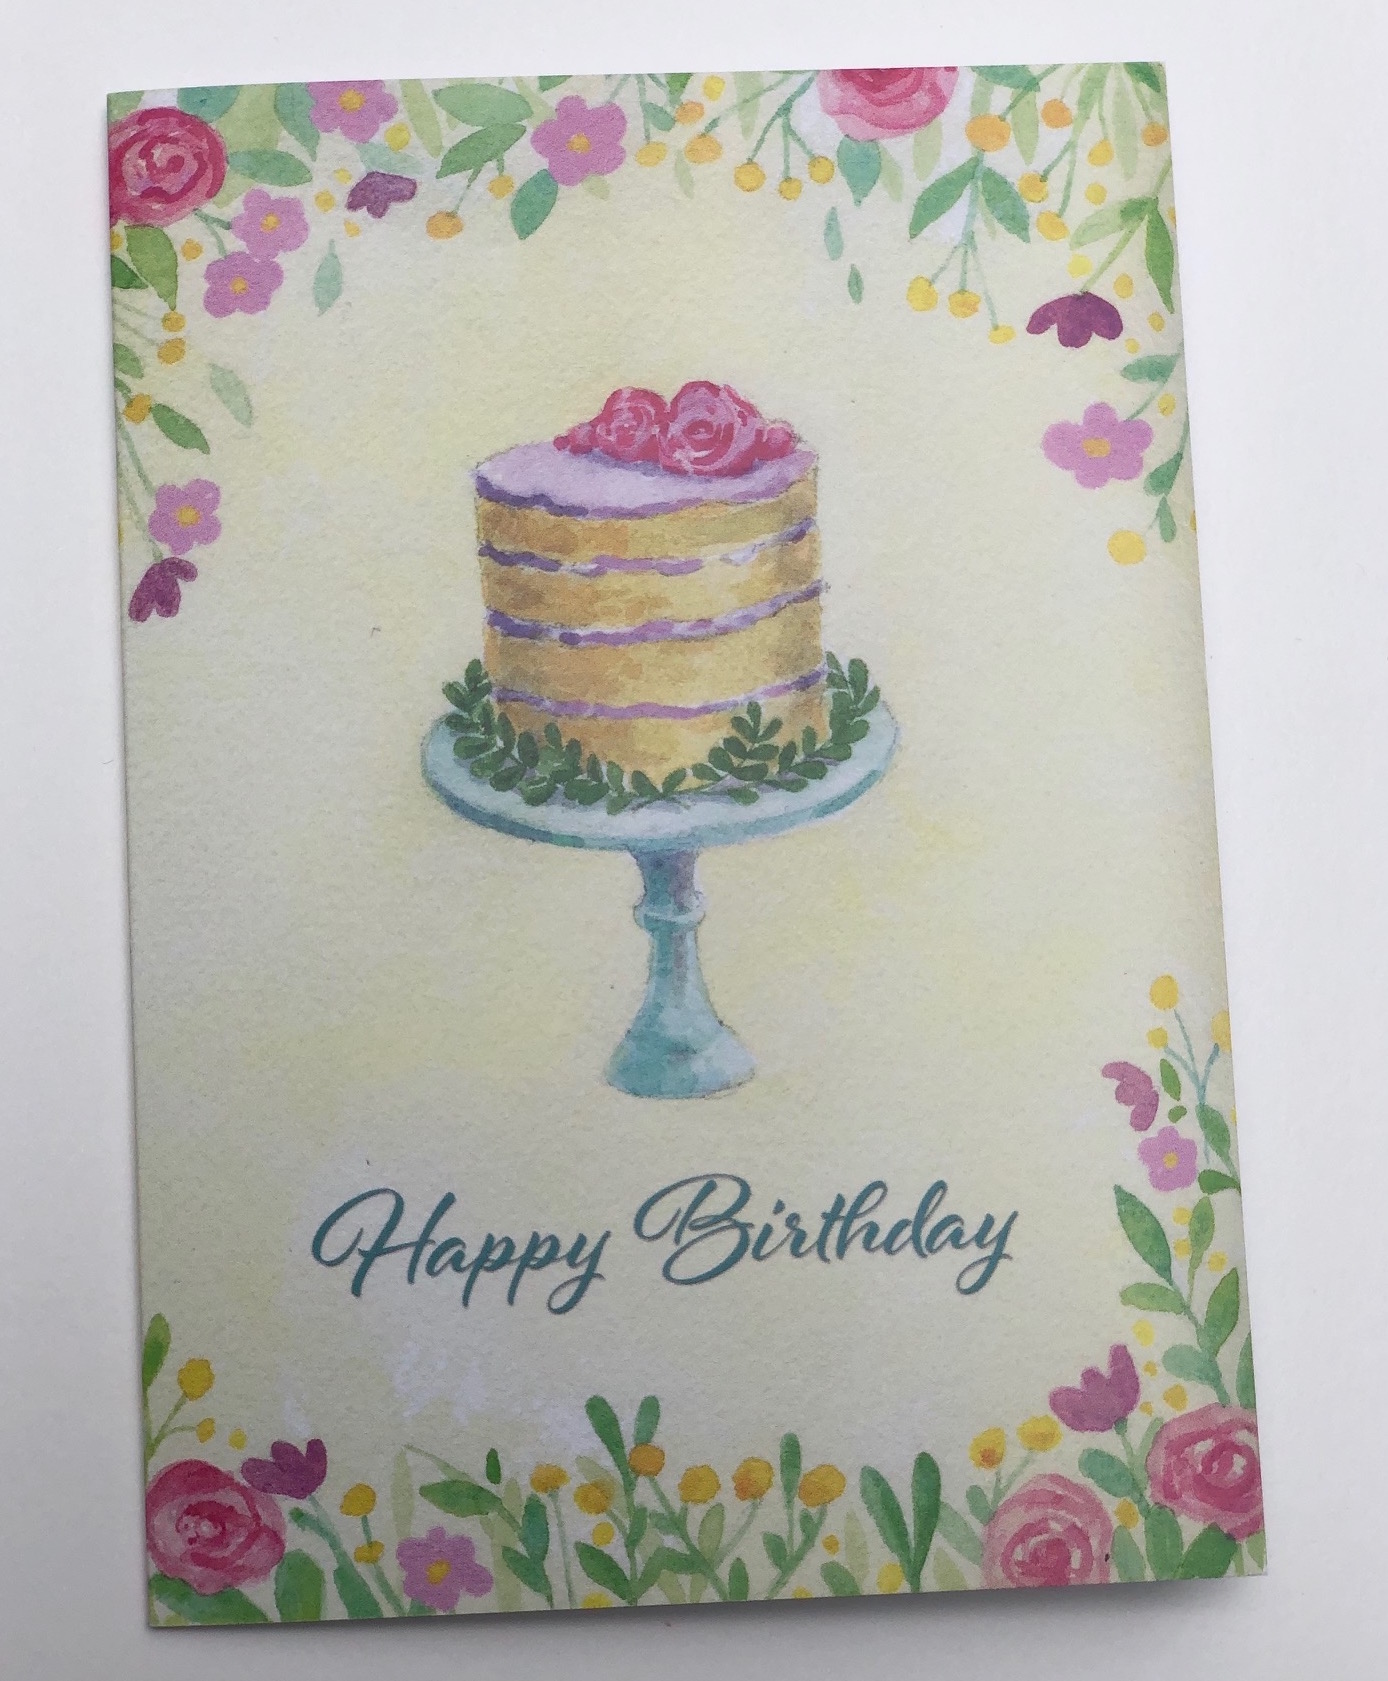 Happy Birthday' Cake Greeting Card – The Little Things in Life